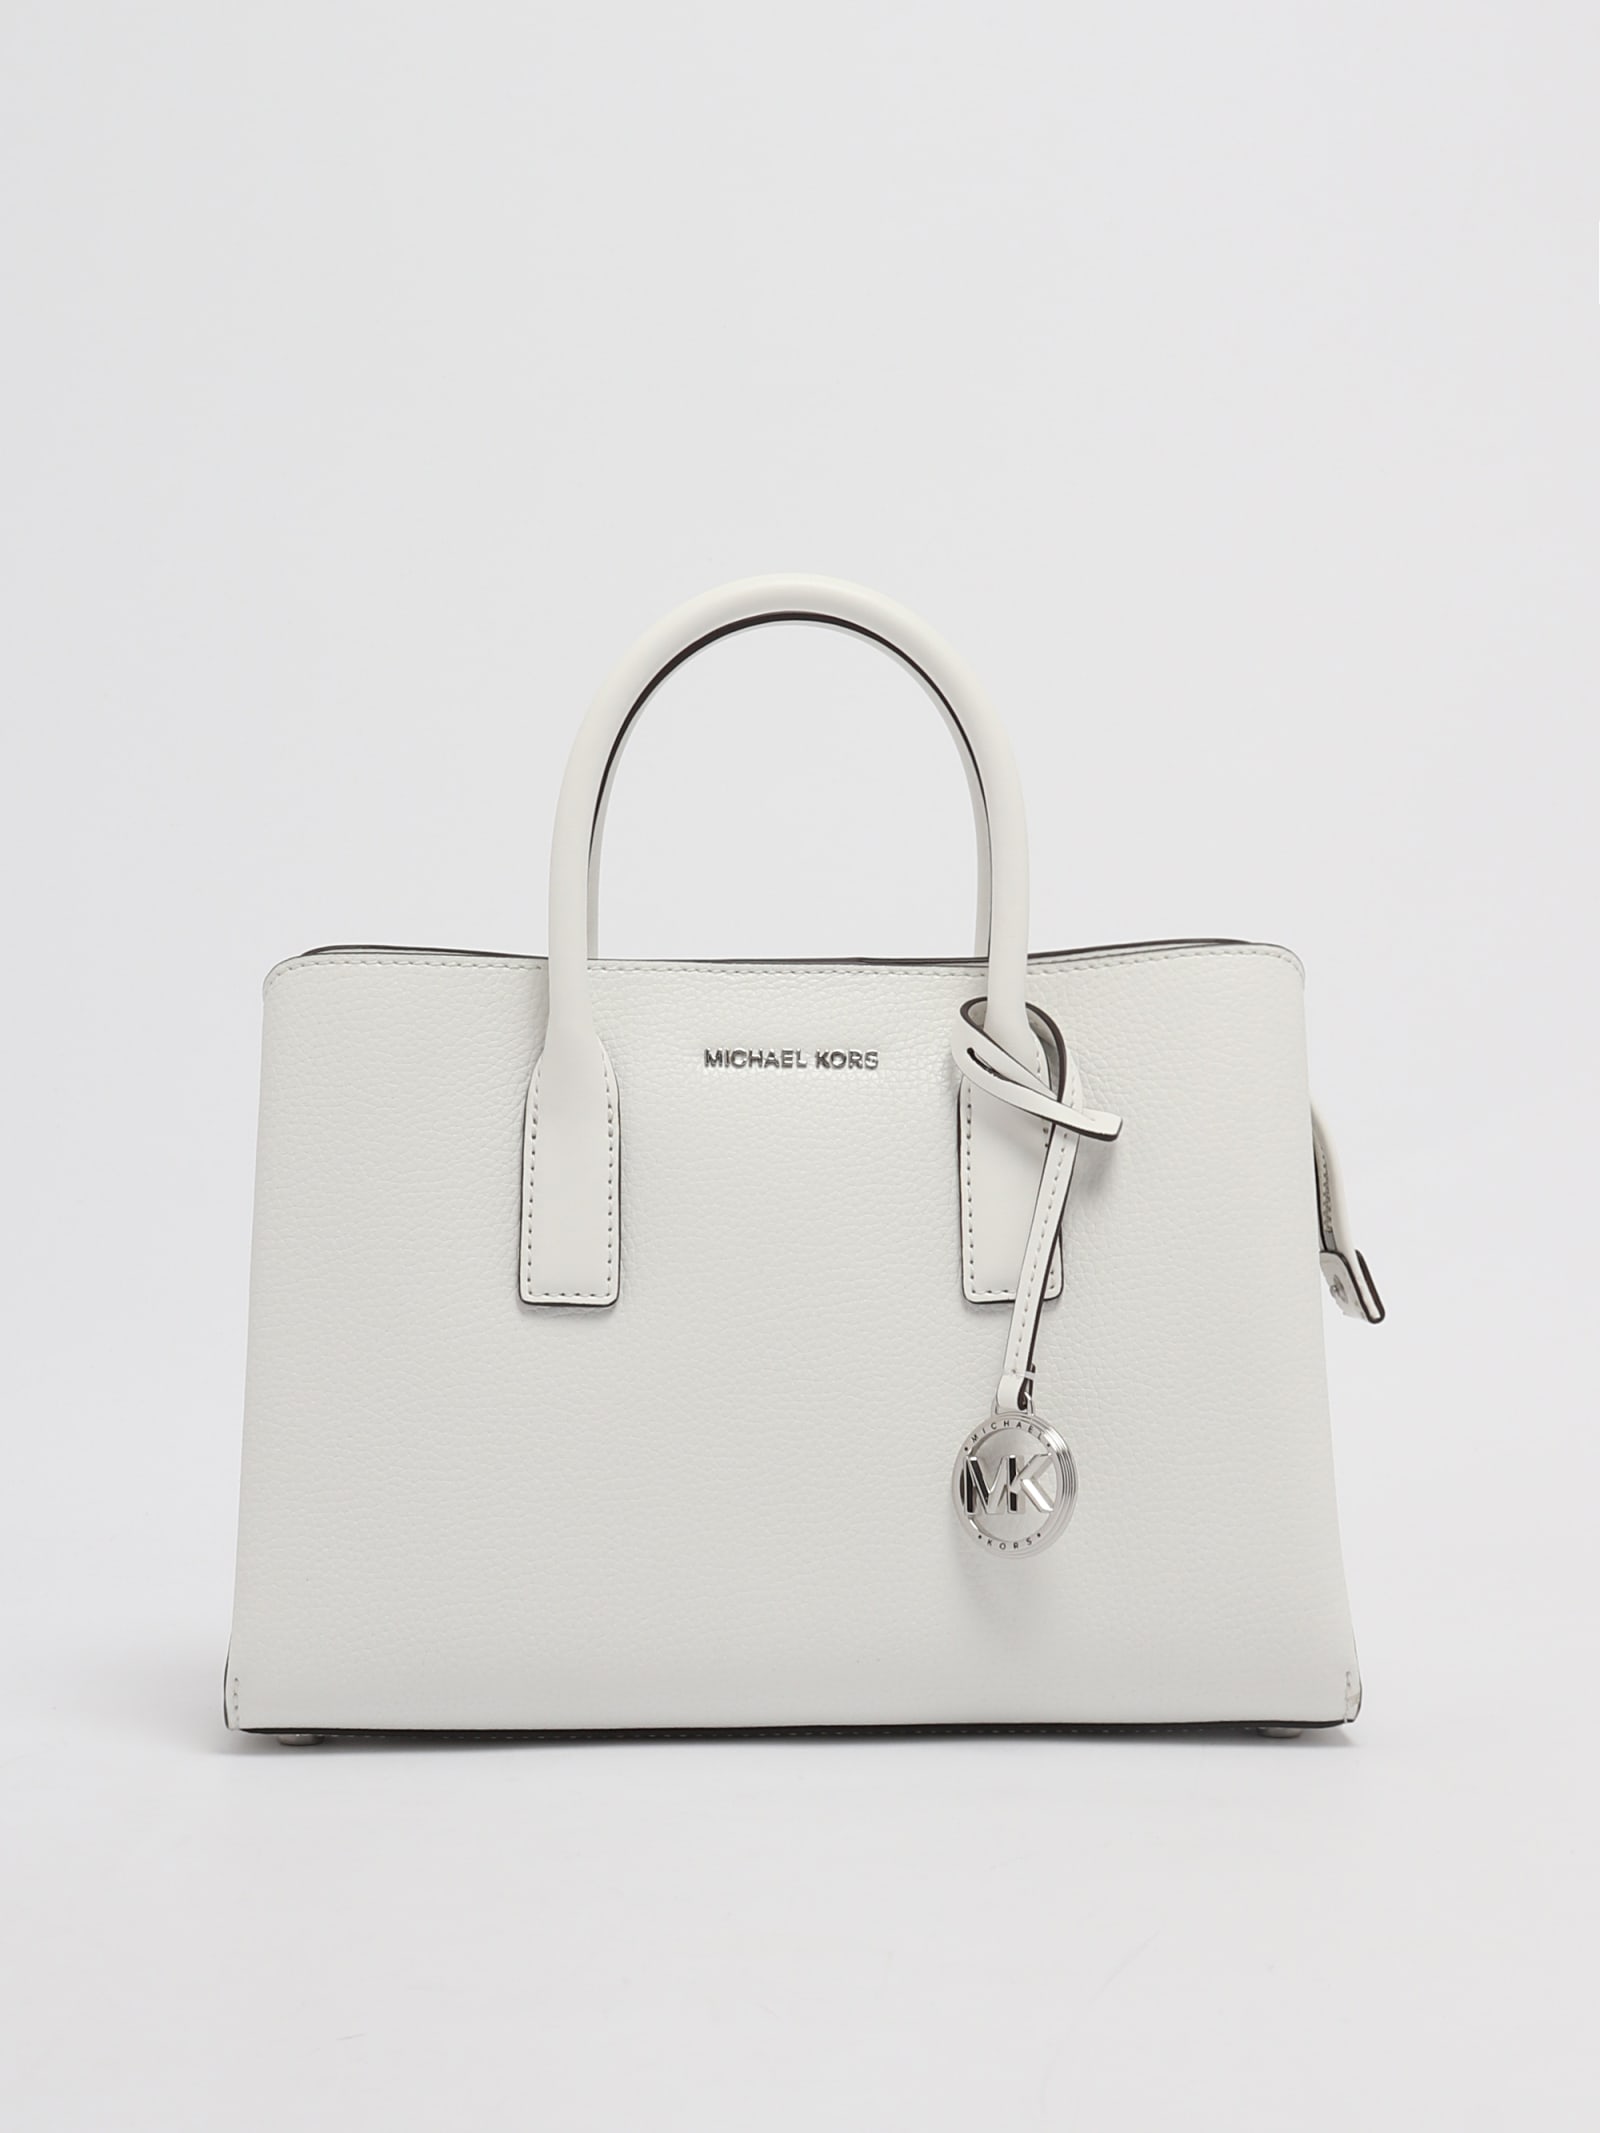 Michael Kors Ruthie Tote In Bianco